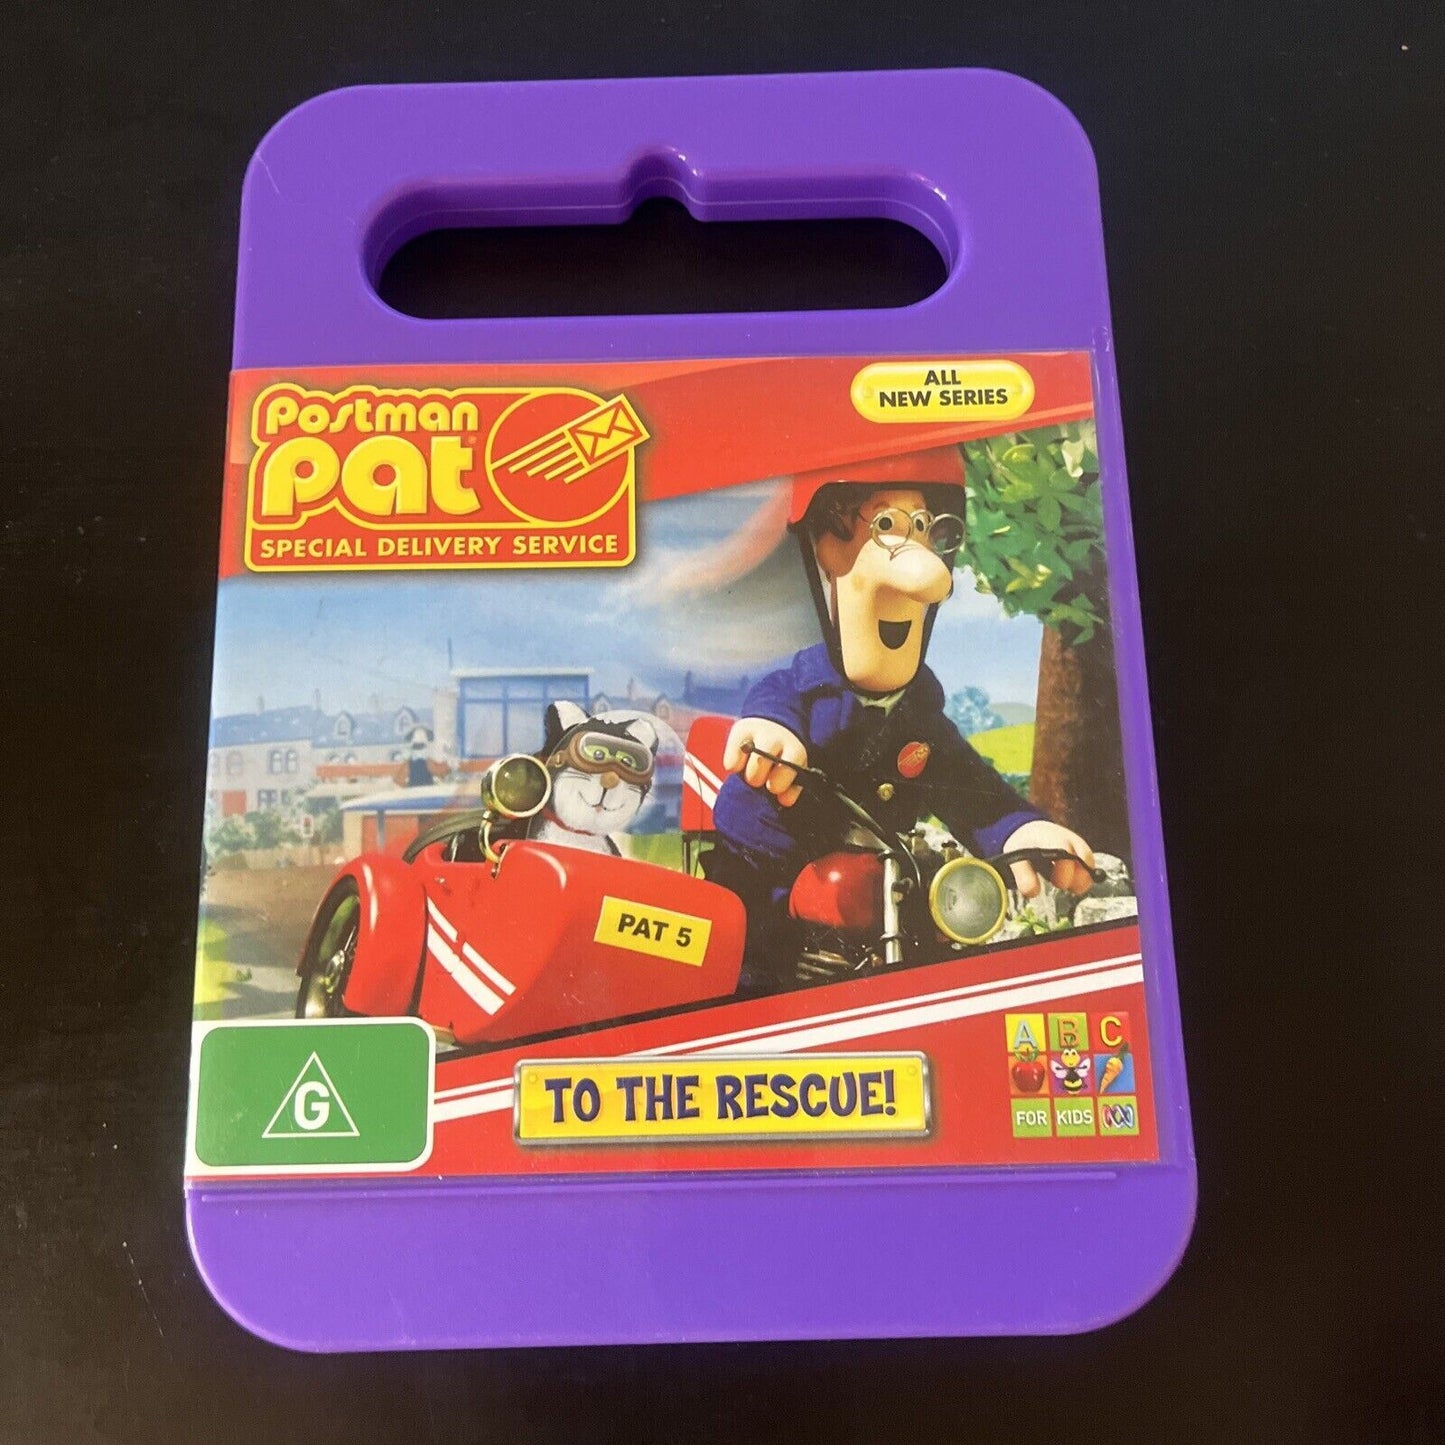 Postman Pat - Special Delivery Service - To The Rescue! (DVD, 2008) Region 4